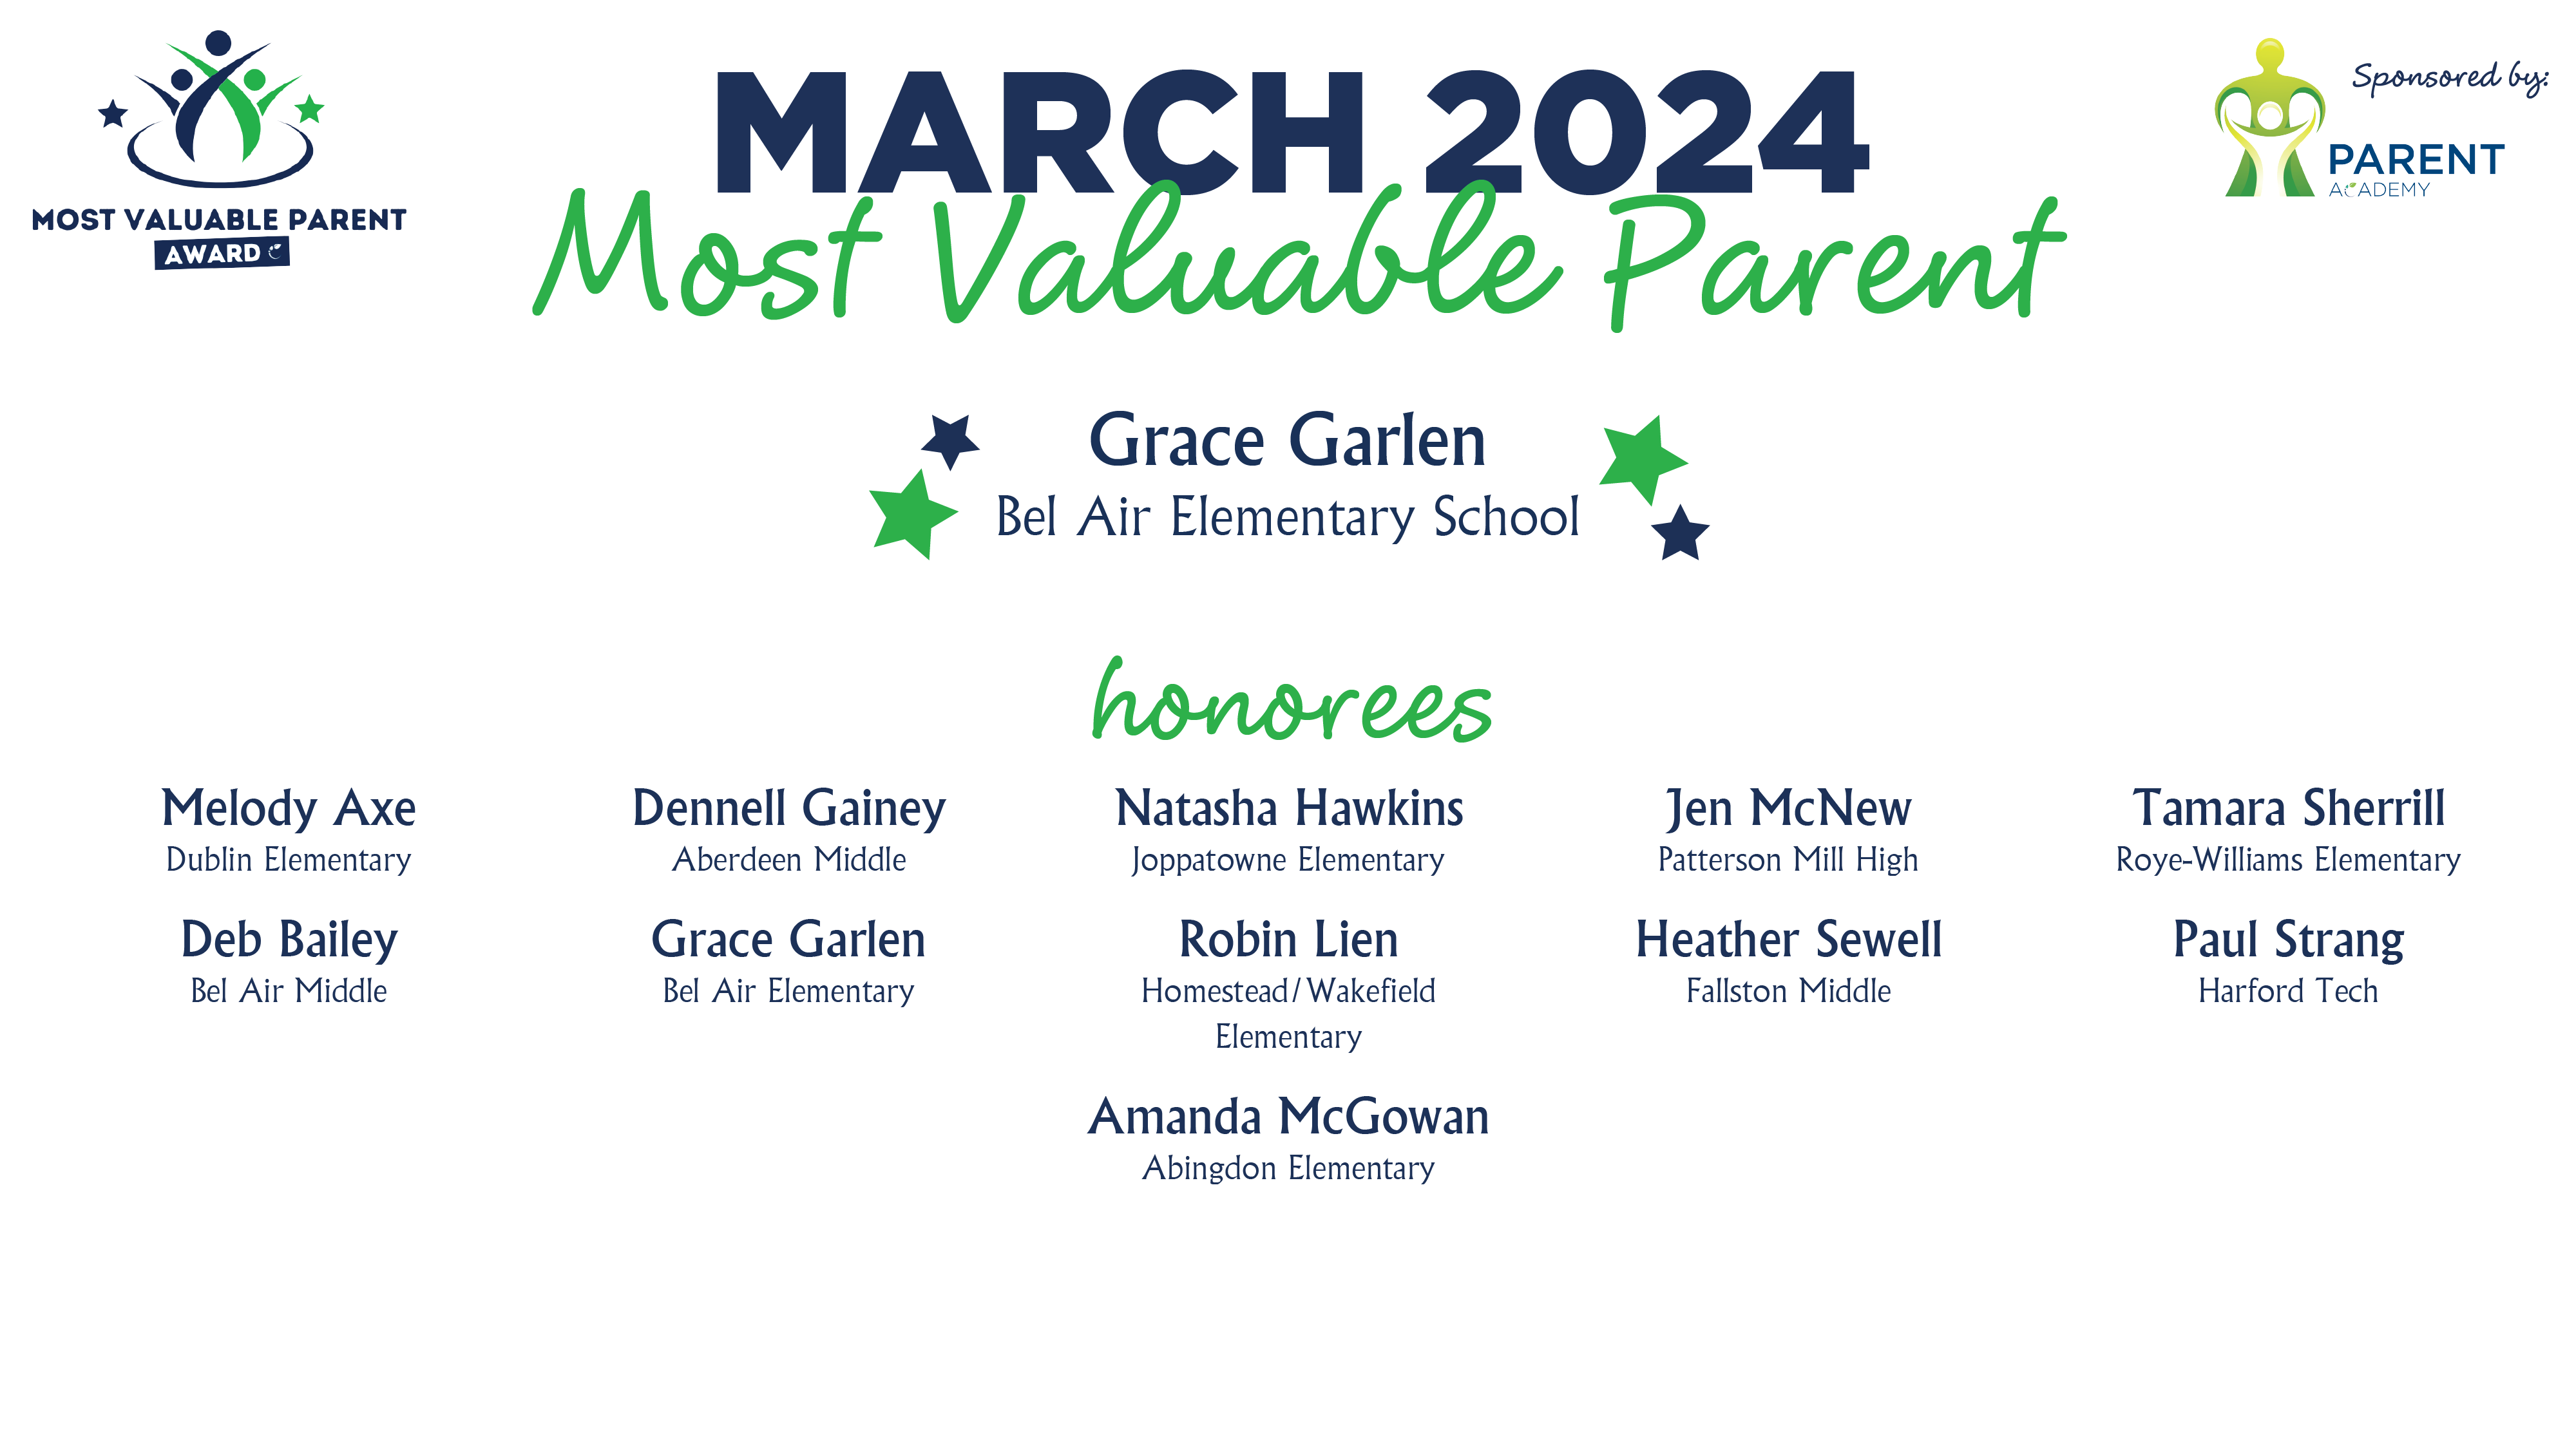 Most Valuable Parent Honorees - March 2024